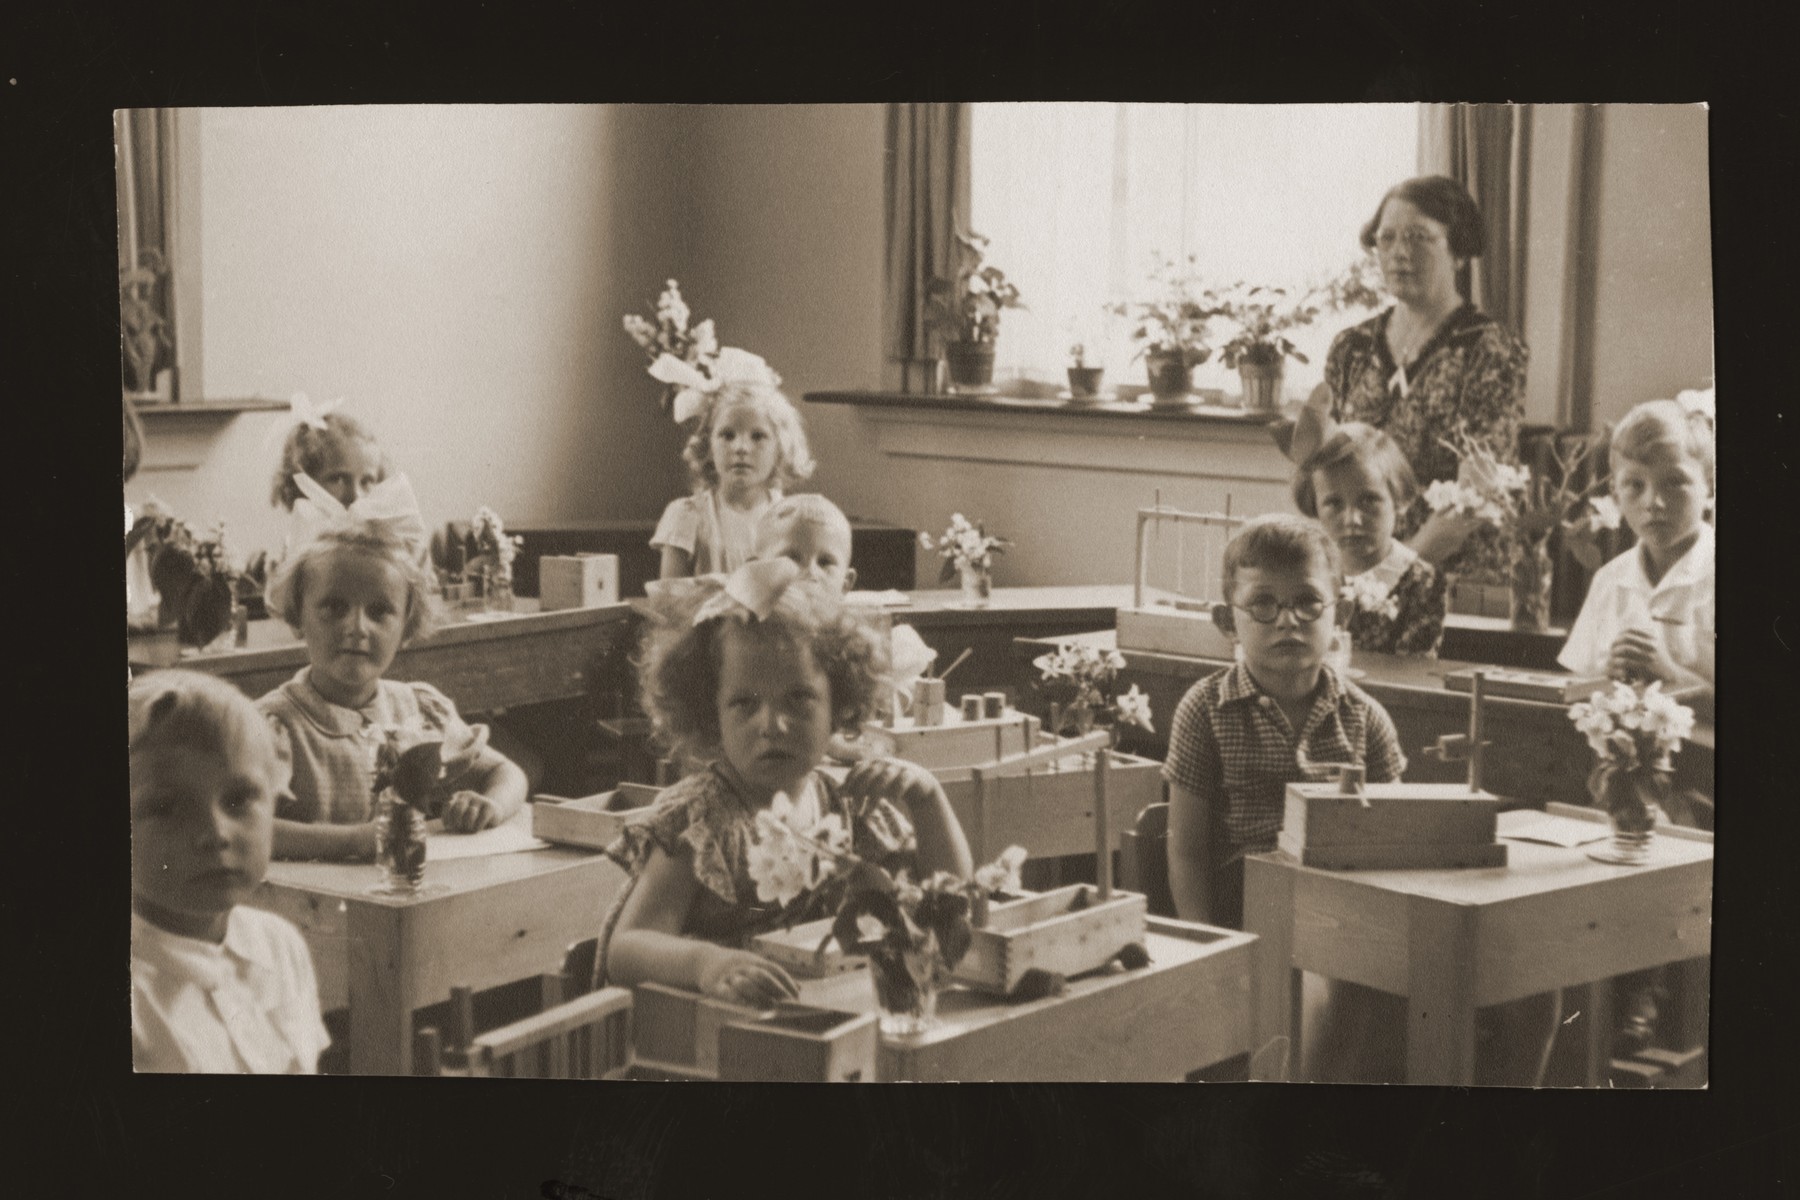 Rachel Kats (front row center) sits in her kindergarten class with other Jewish and non-Jewish children.